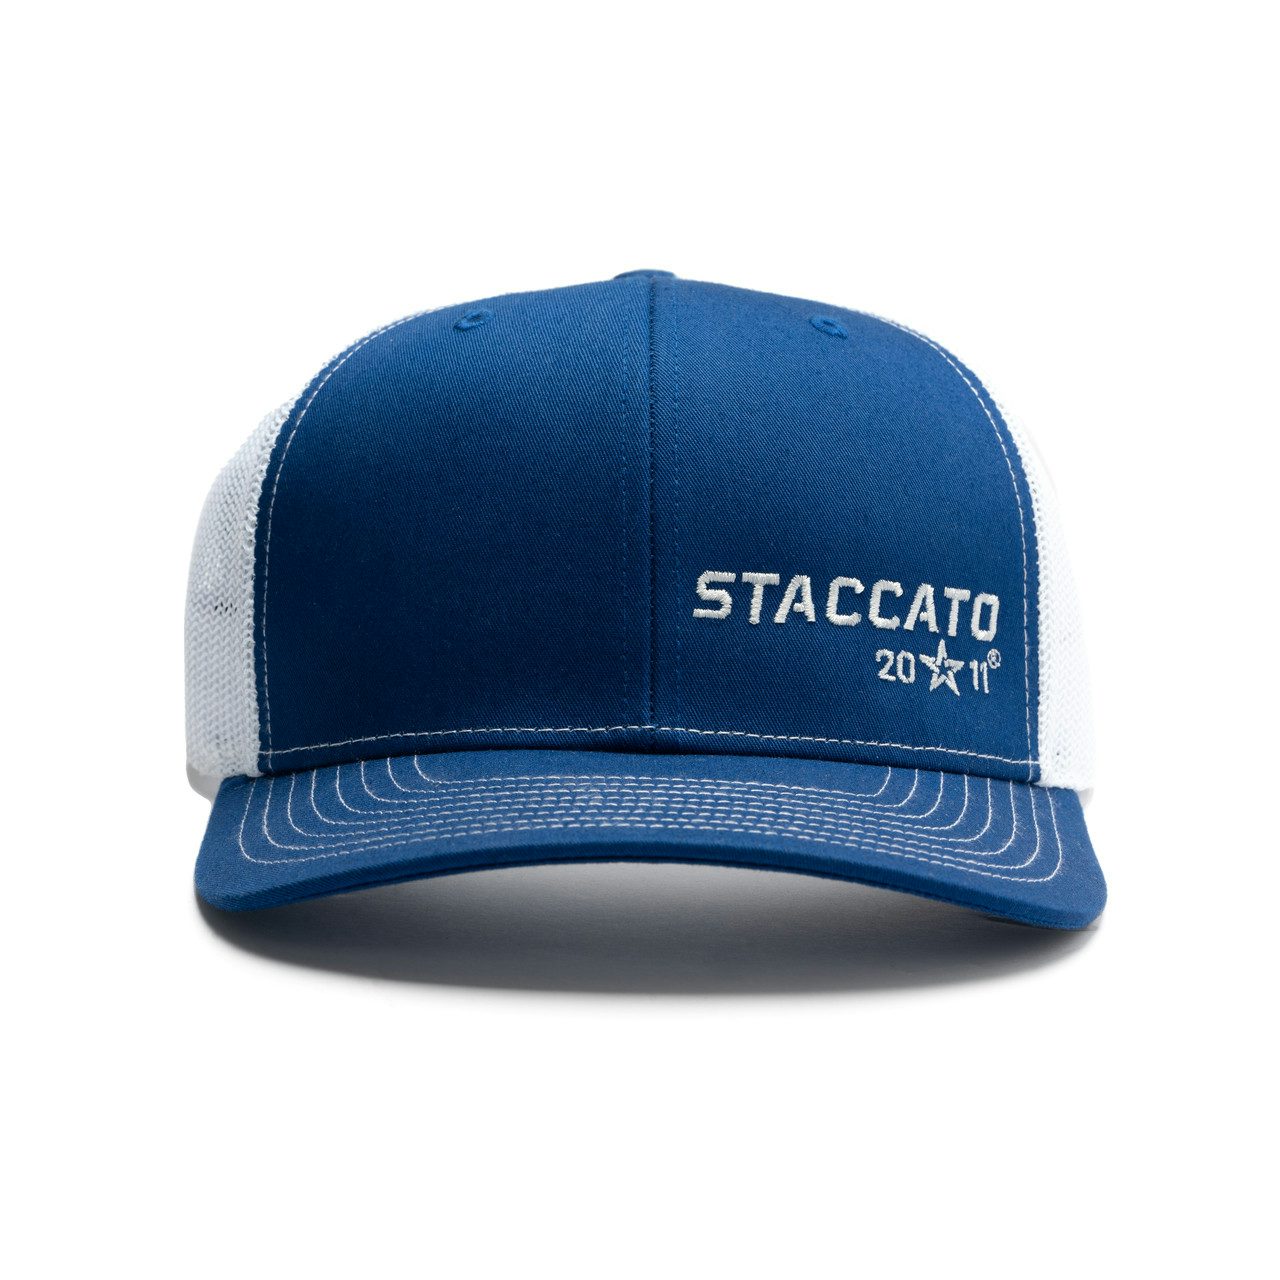 Staccato 2011® D. Cupp Trucker Hat